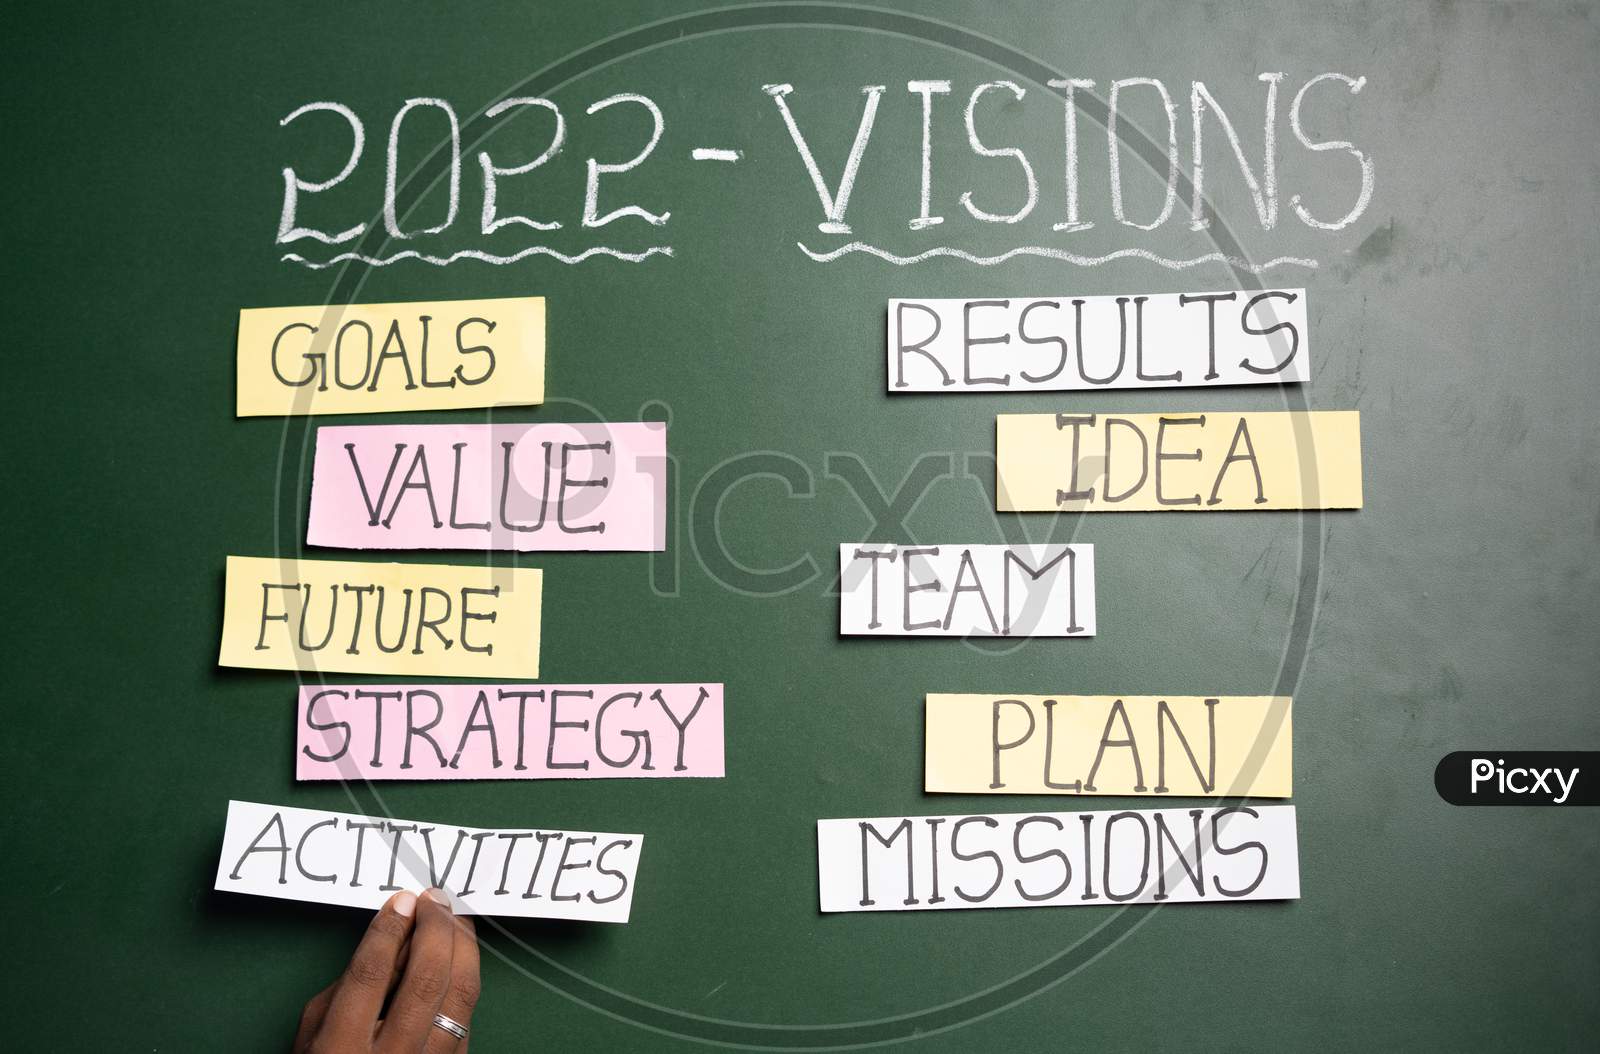 Close Up Shot Of Hand Pasting 2022 Visions On Green Board - Concept Of New Year Visions Planning, Business Motivation And Inspiration.